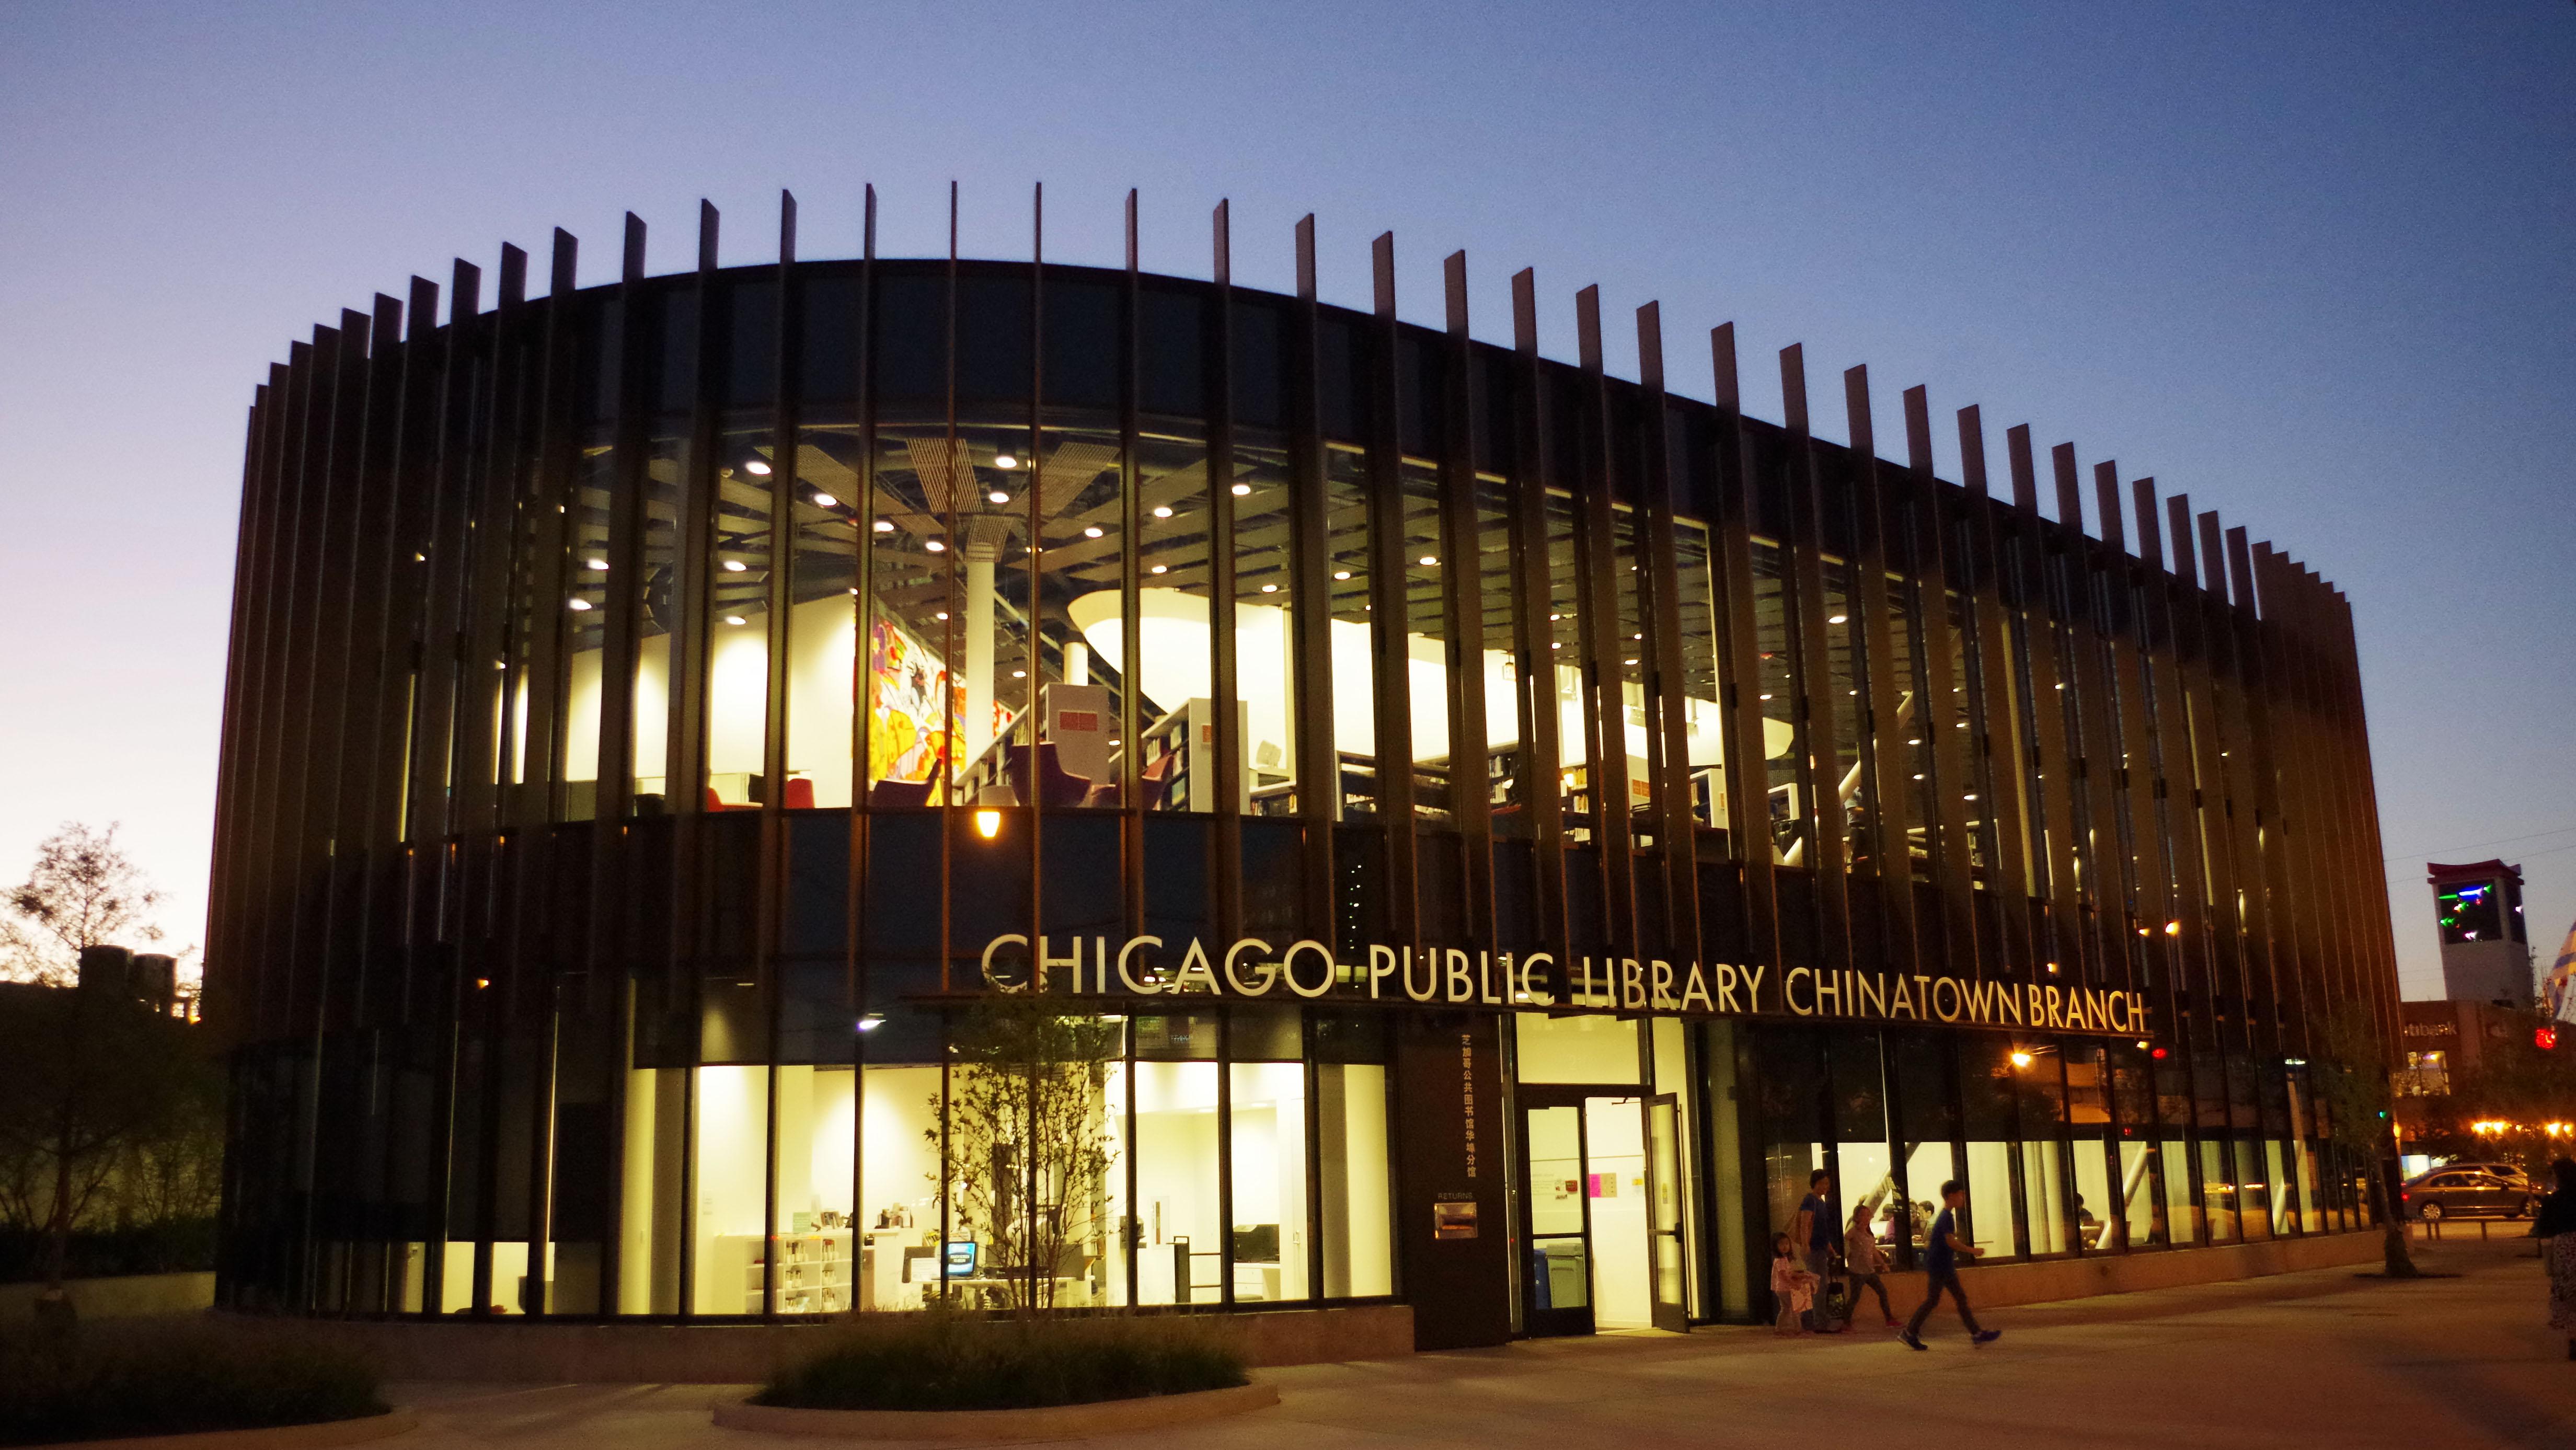 The Chicago Public Library’s revamped Chinatown branch opened in 2015 a feng shui-influenced interior design and expansive views of the city. A design competition for three new CPL branches just wrapped up. (Smart Chicago Collaborative's photostream / Flickr)